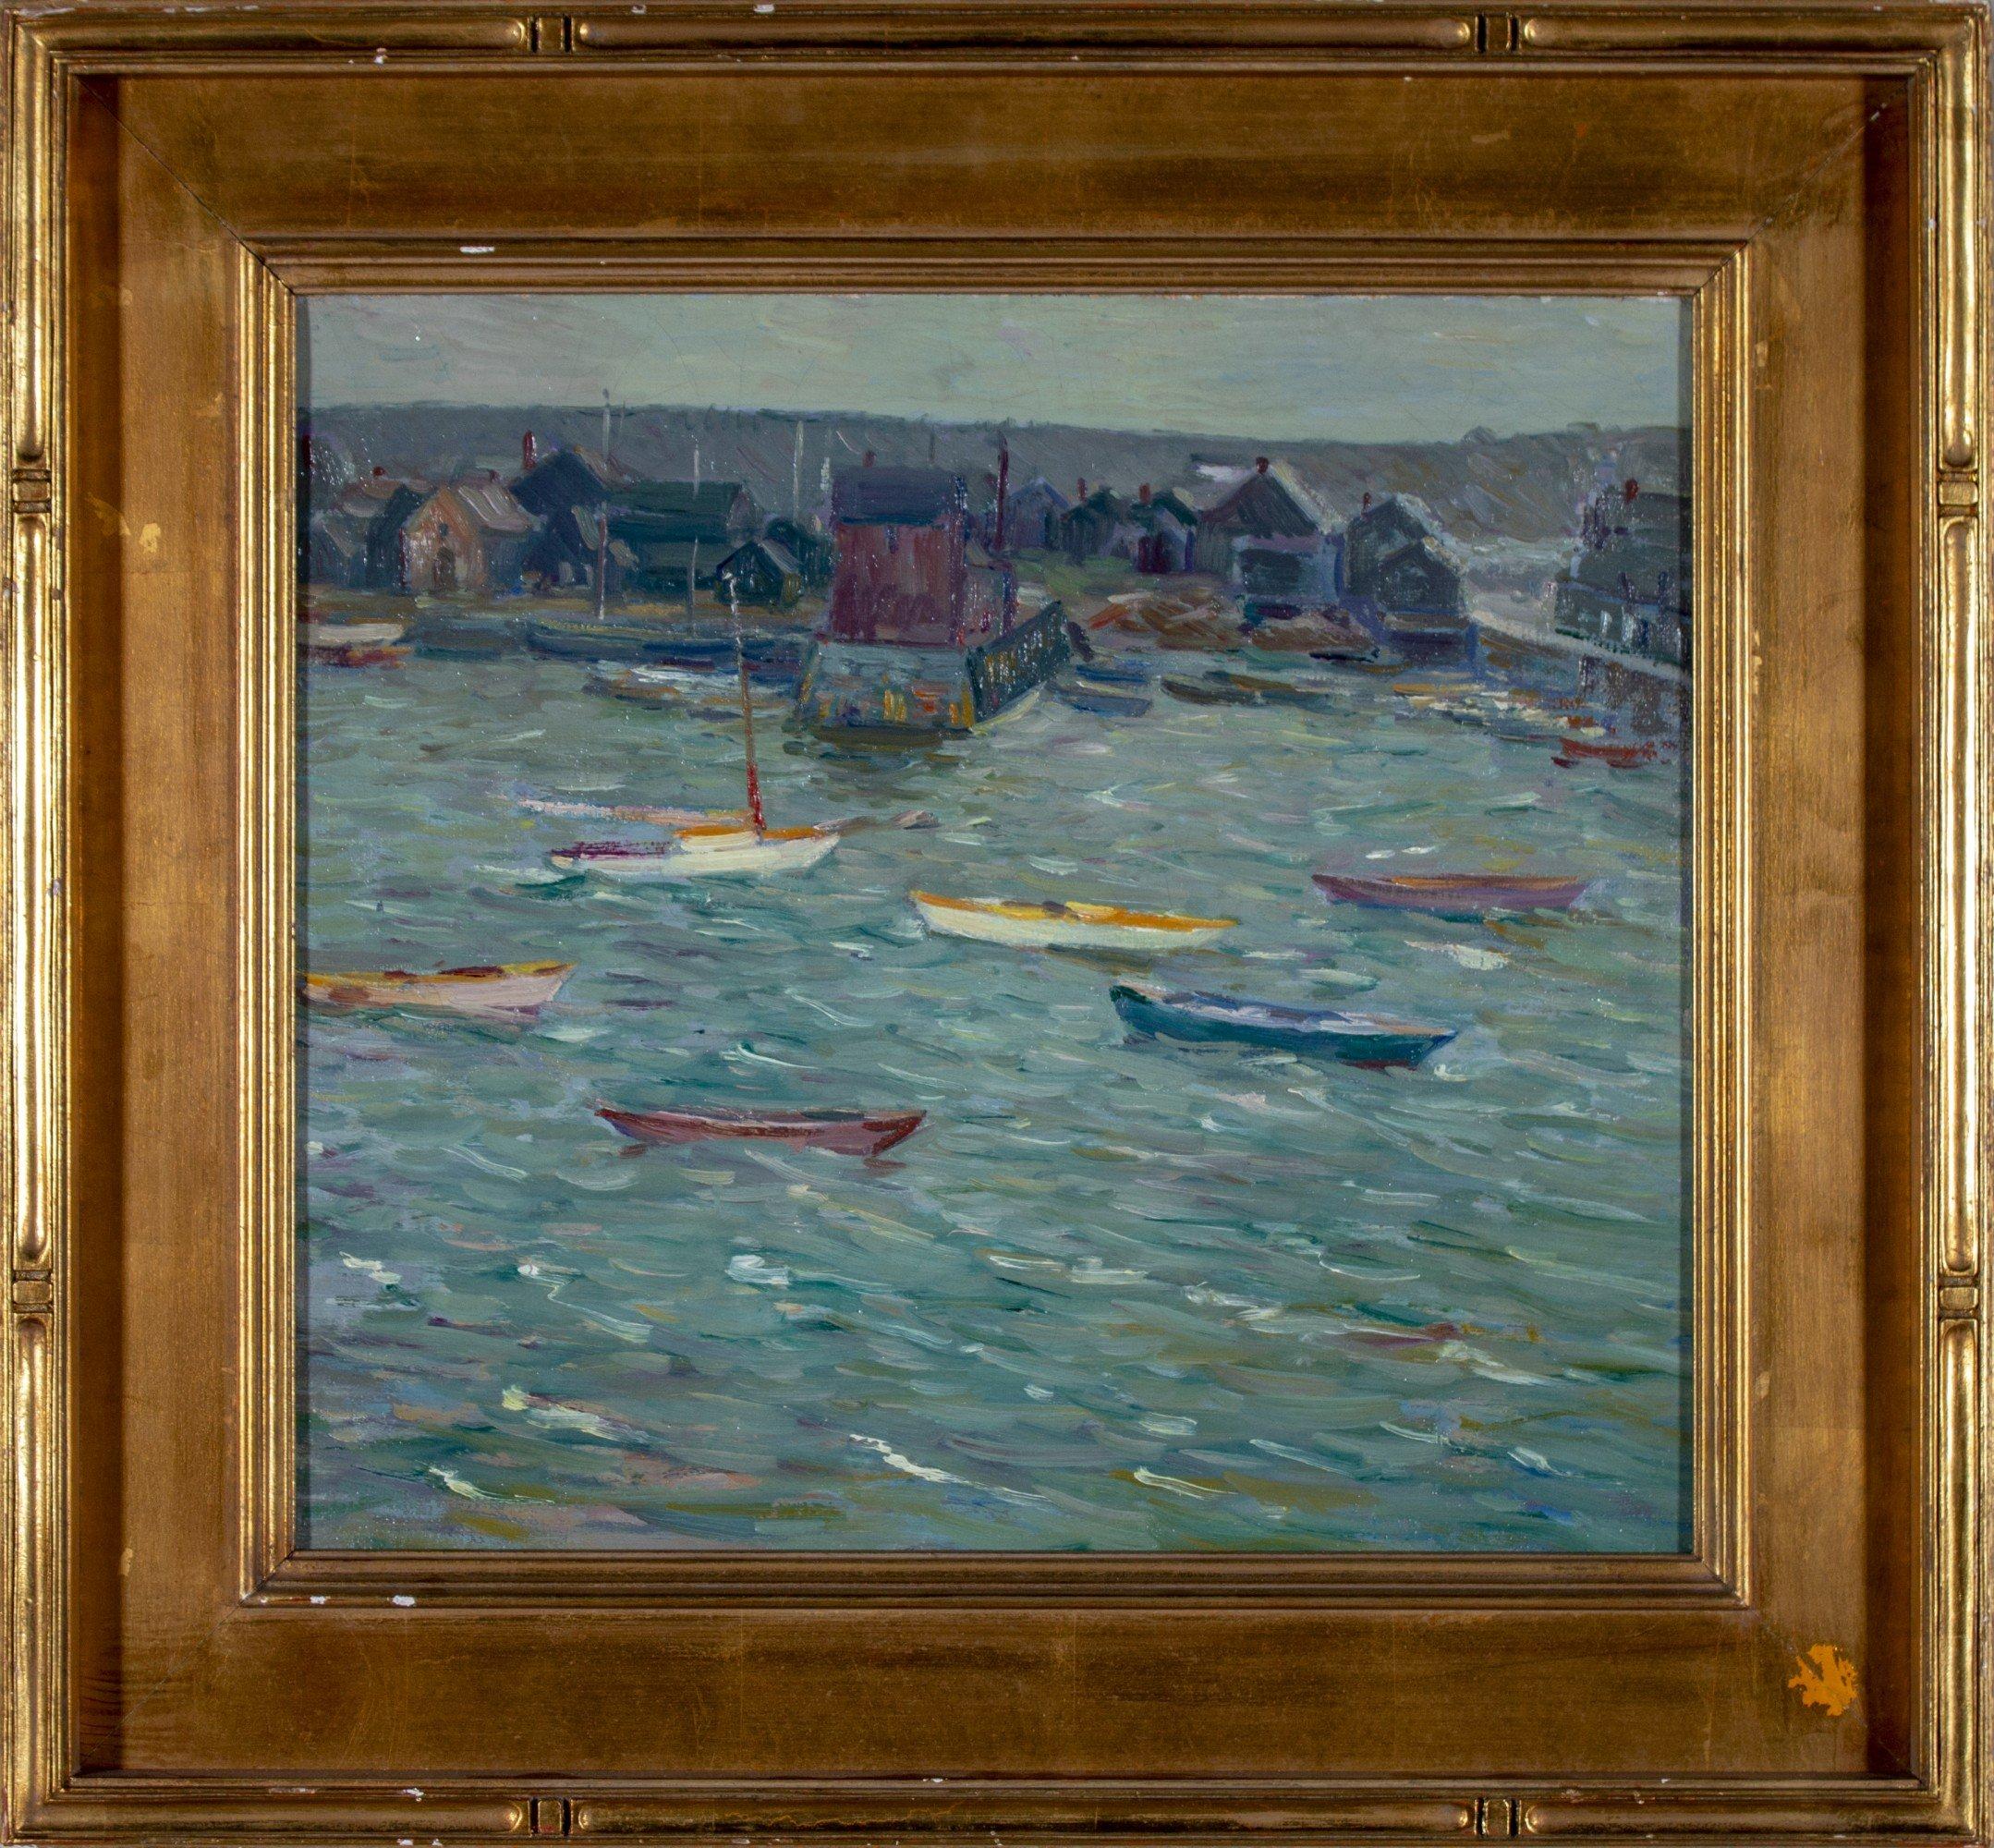 Charles Salis Kaelin Figurative Painting - Early 20th Century Impressionist Seascape, Harbor and Town Scene